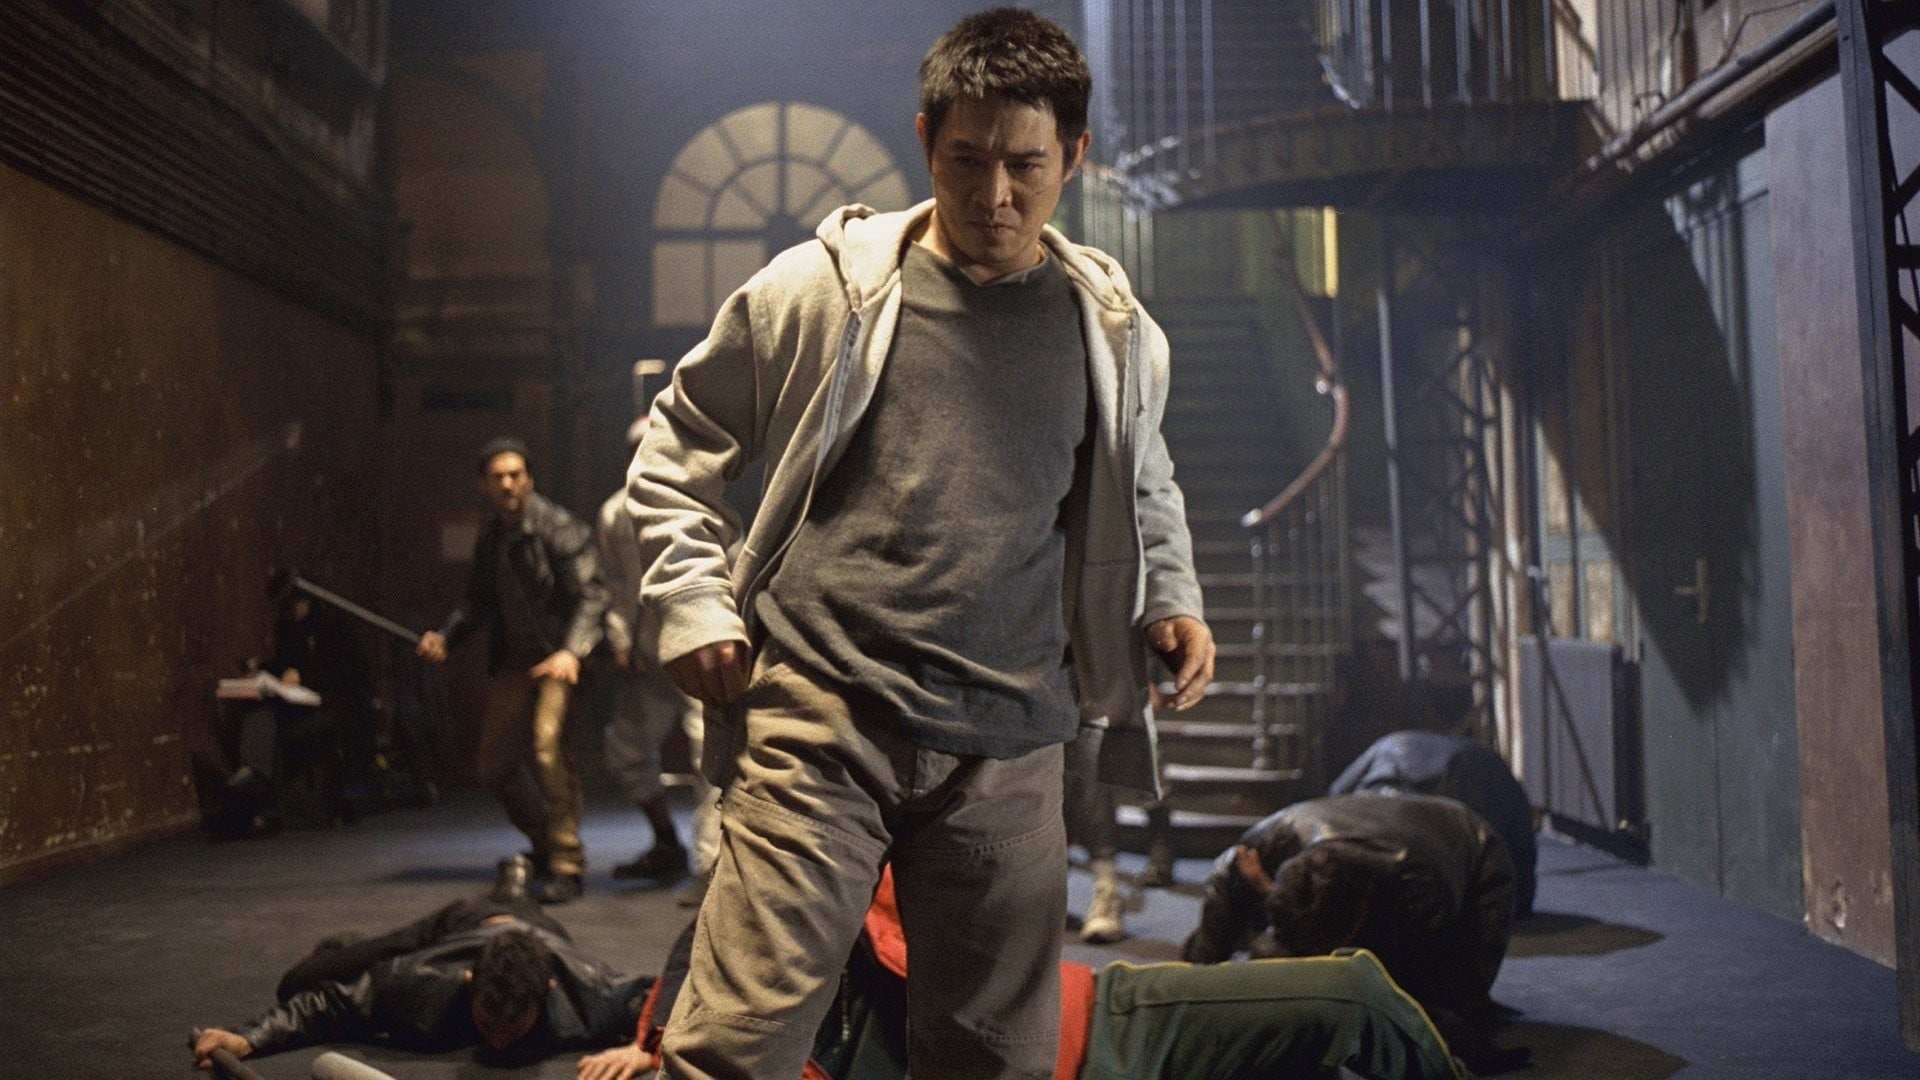 Jet Li as Danny in a still from Unleashed. The Chinese actor received critical acclaim for his performance alongside heavyweights including Morgan Freeman in the 2005 action film, but it didn’t make him a Hollywood staple. Photo: Universal Pictures